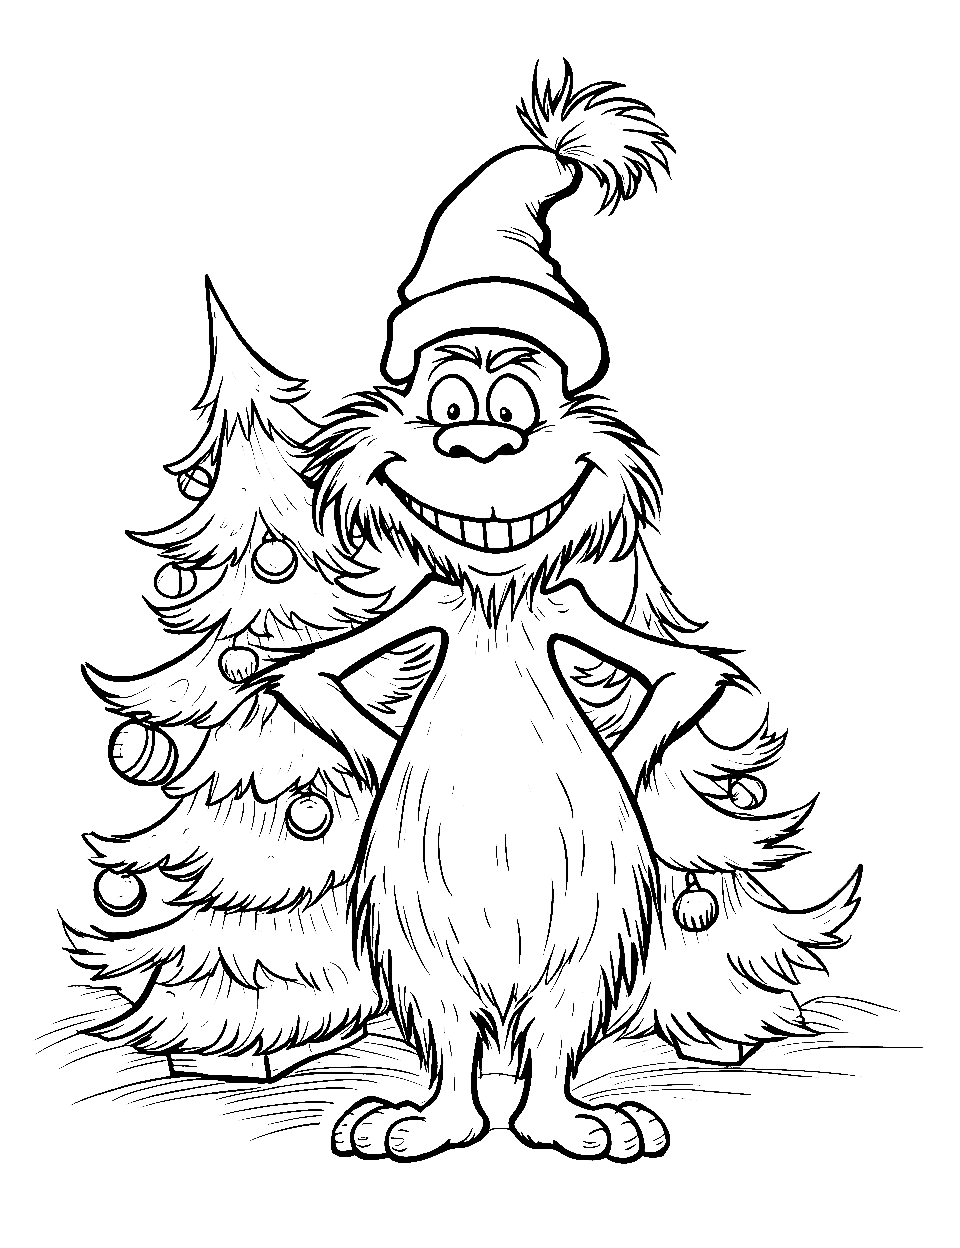 Grinch and Christmas Tree Coloring Page - The Grinch and his big, fully decorated Christmas trees.